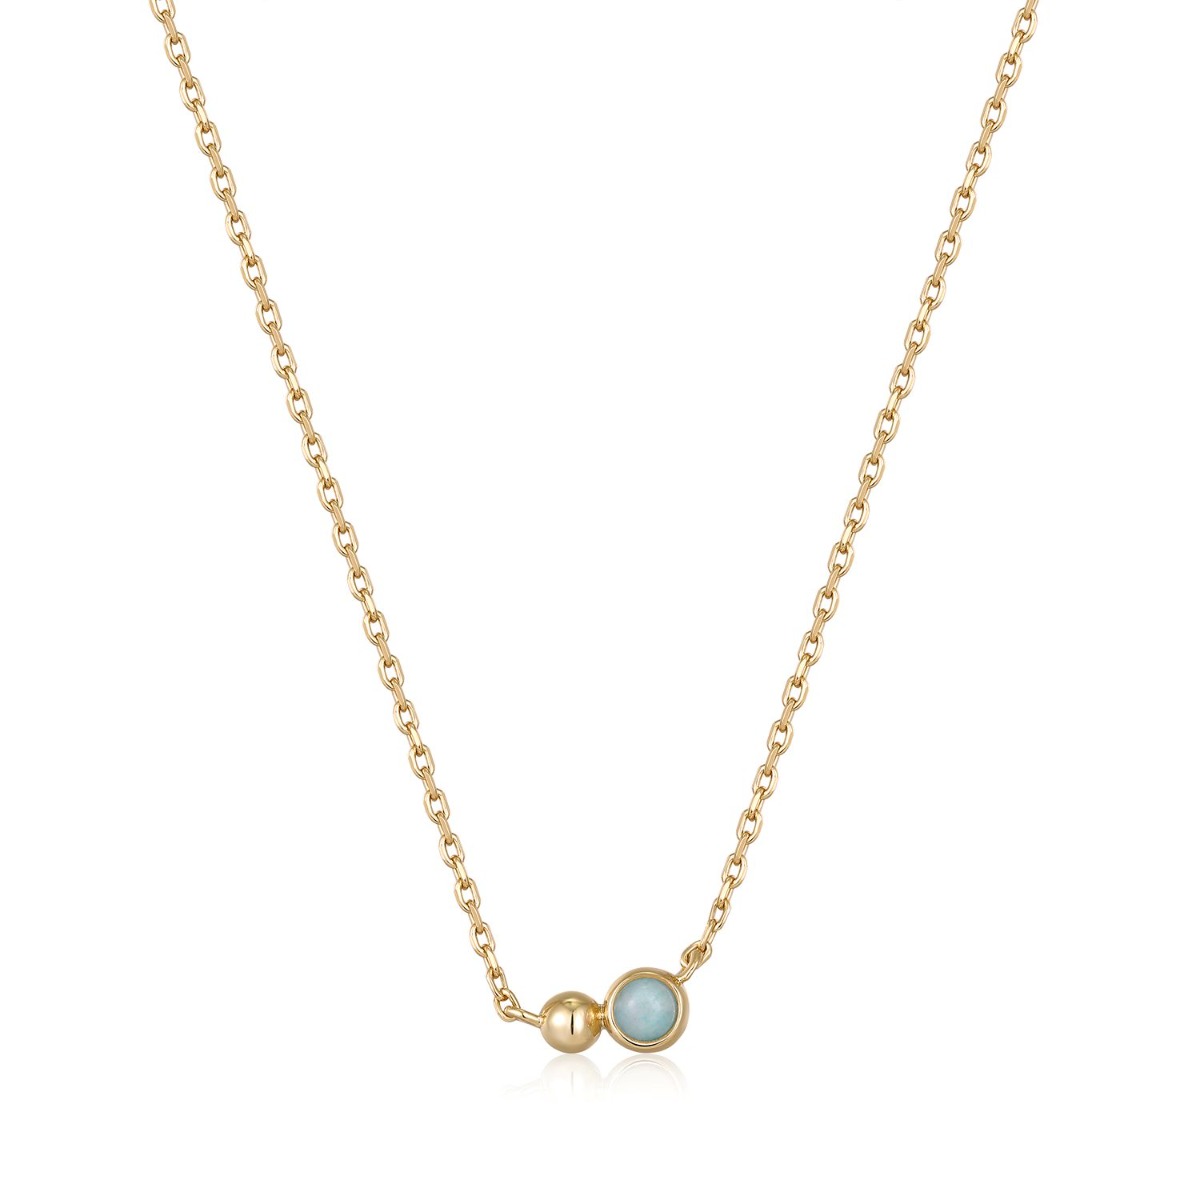 Ania Haie Gold Orb Amazonite Pendant Necklace - N045-02G-AM